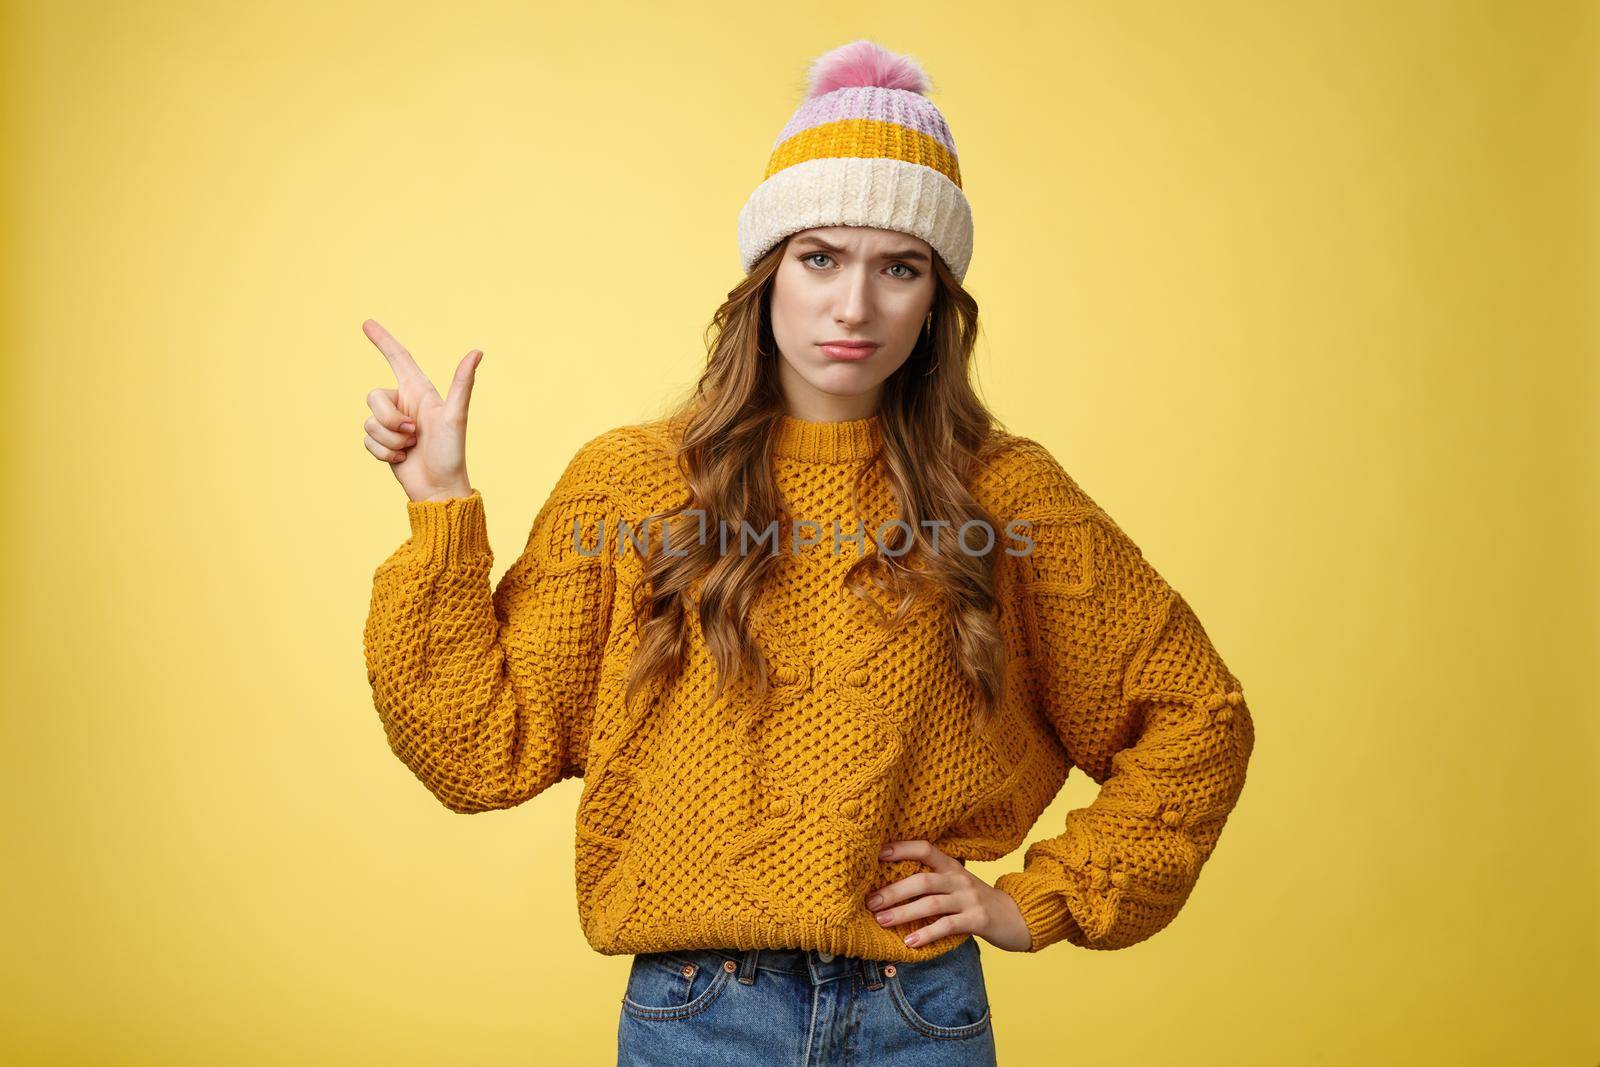 Meh lame promo. Portrait picky arrogant unimpressed complaining female fashionable customer pointing upper left corner frowning cringing displeased unsatisfied, dislike bad offer, yellow background.